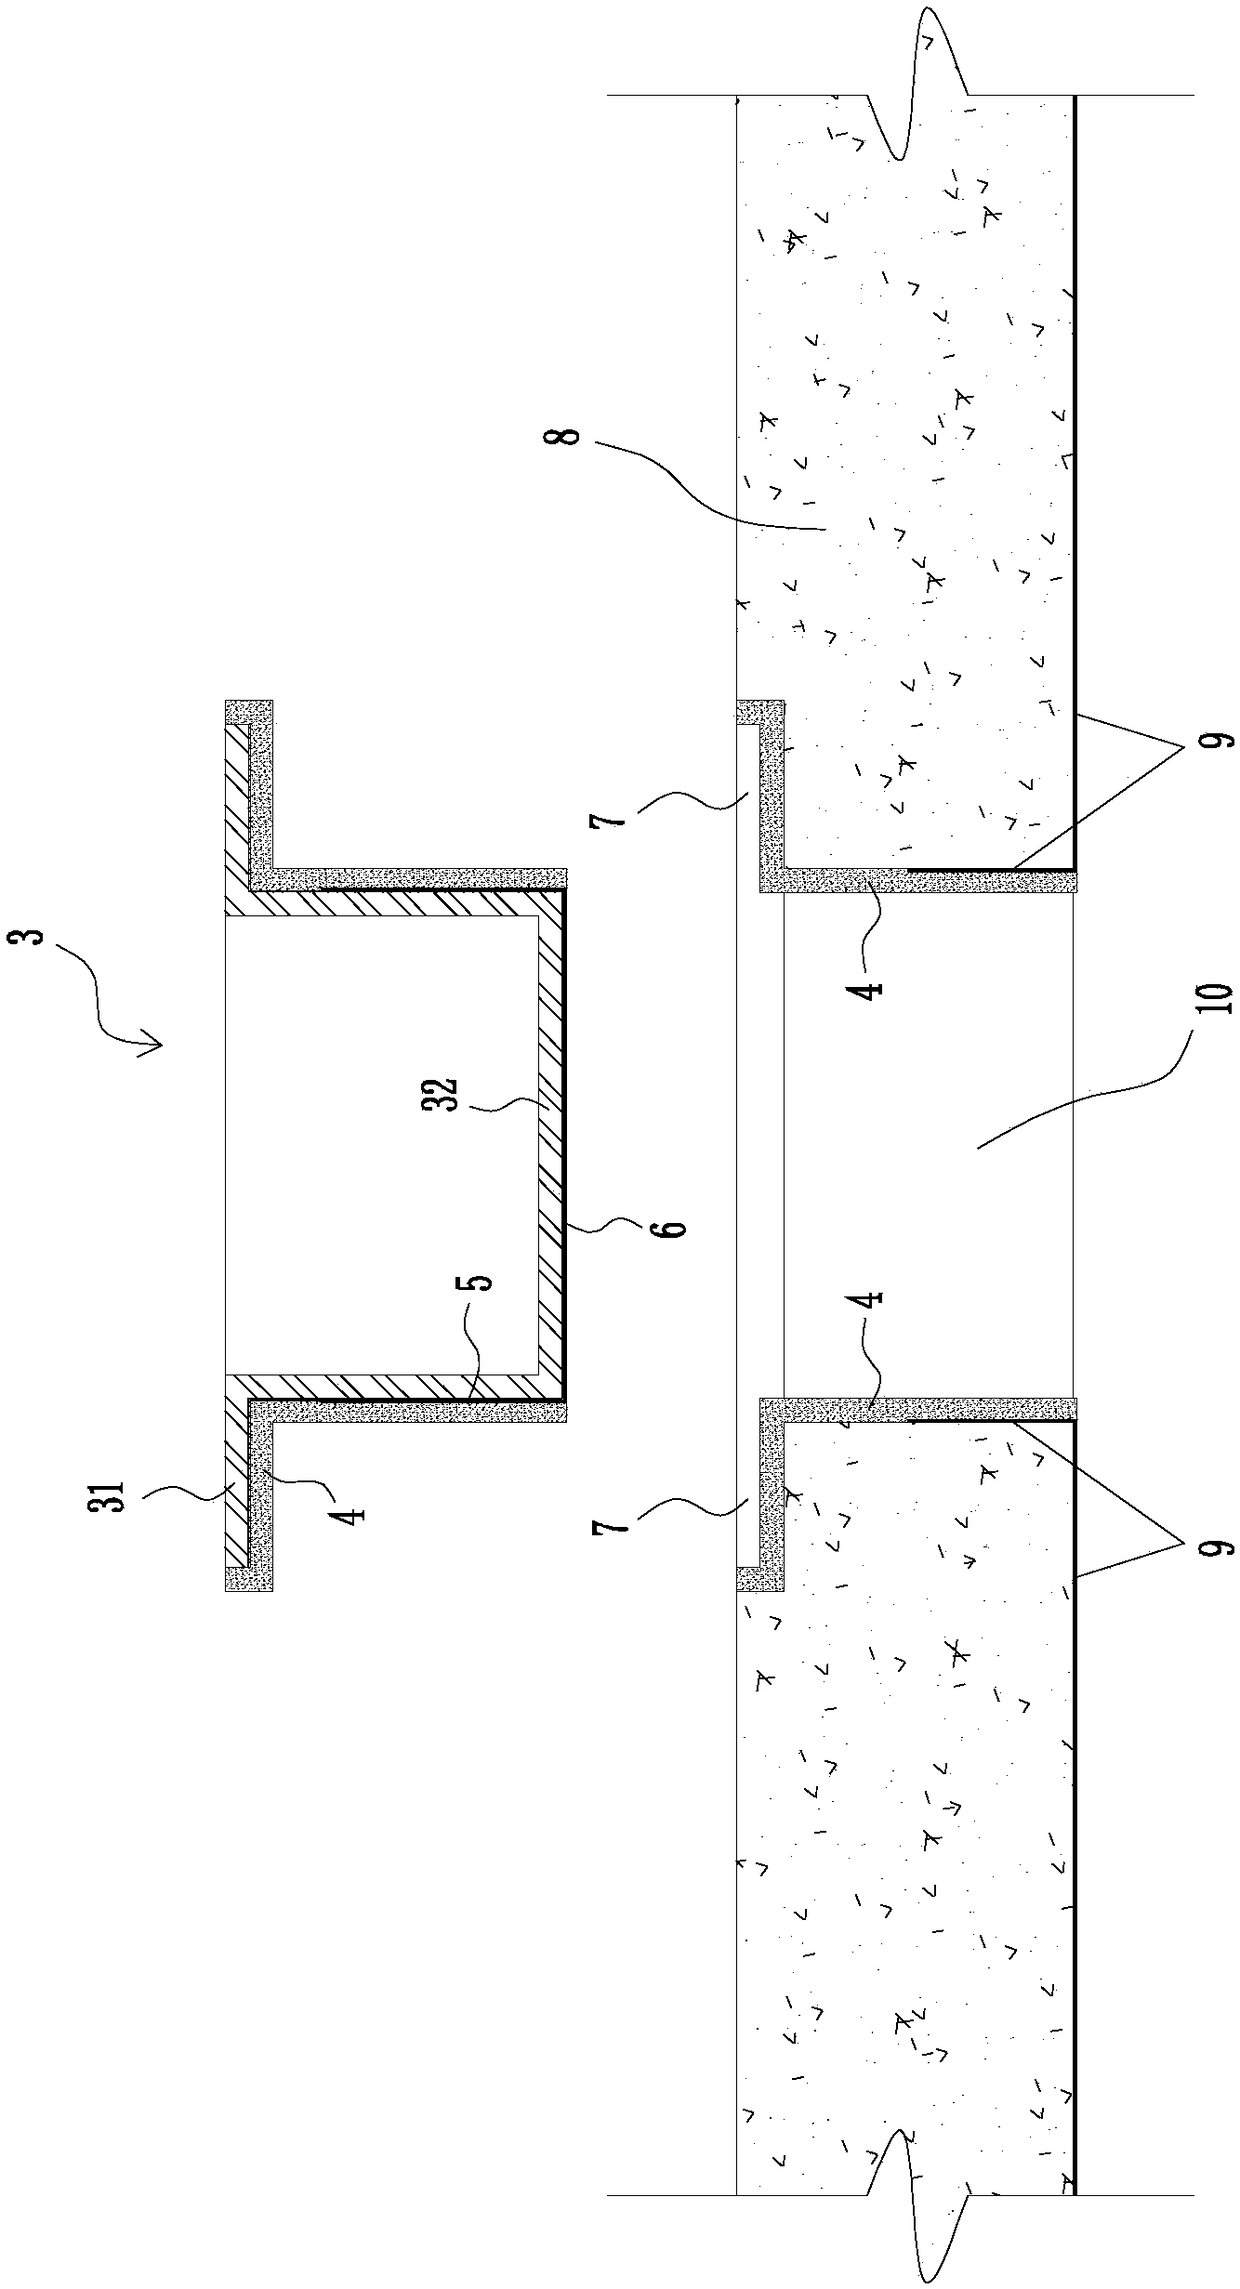 A stainless steel box and repair method for repairing holes left in hoisting reinforced concrete roofs of prilling towers and silos